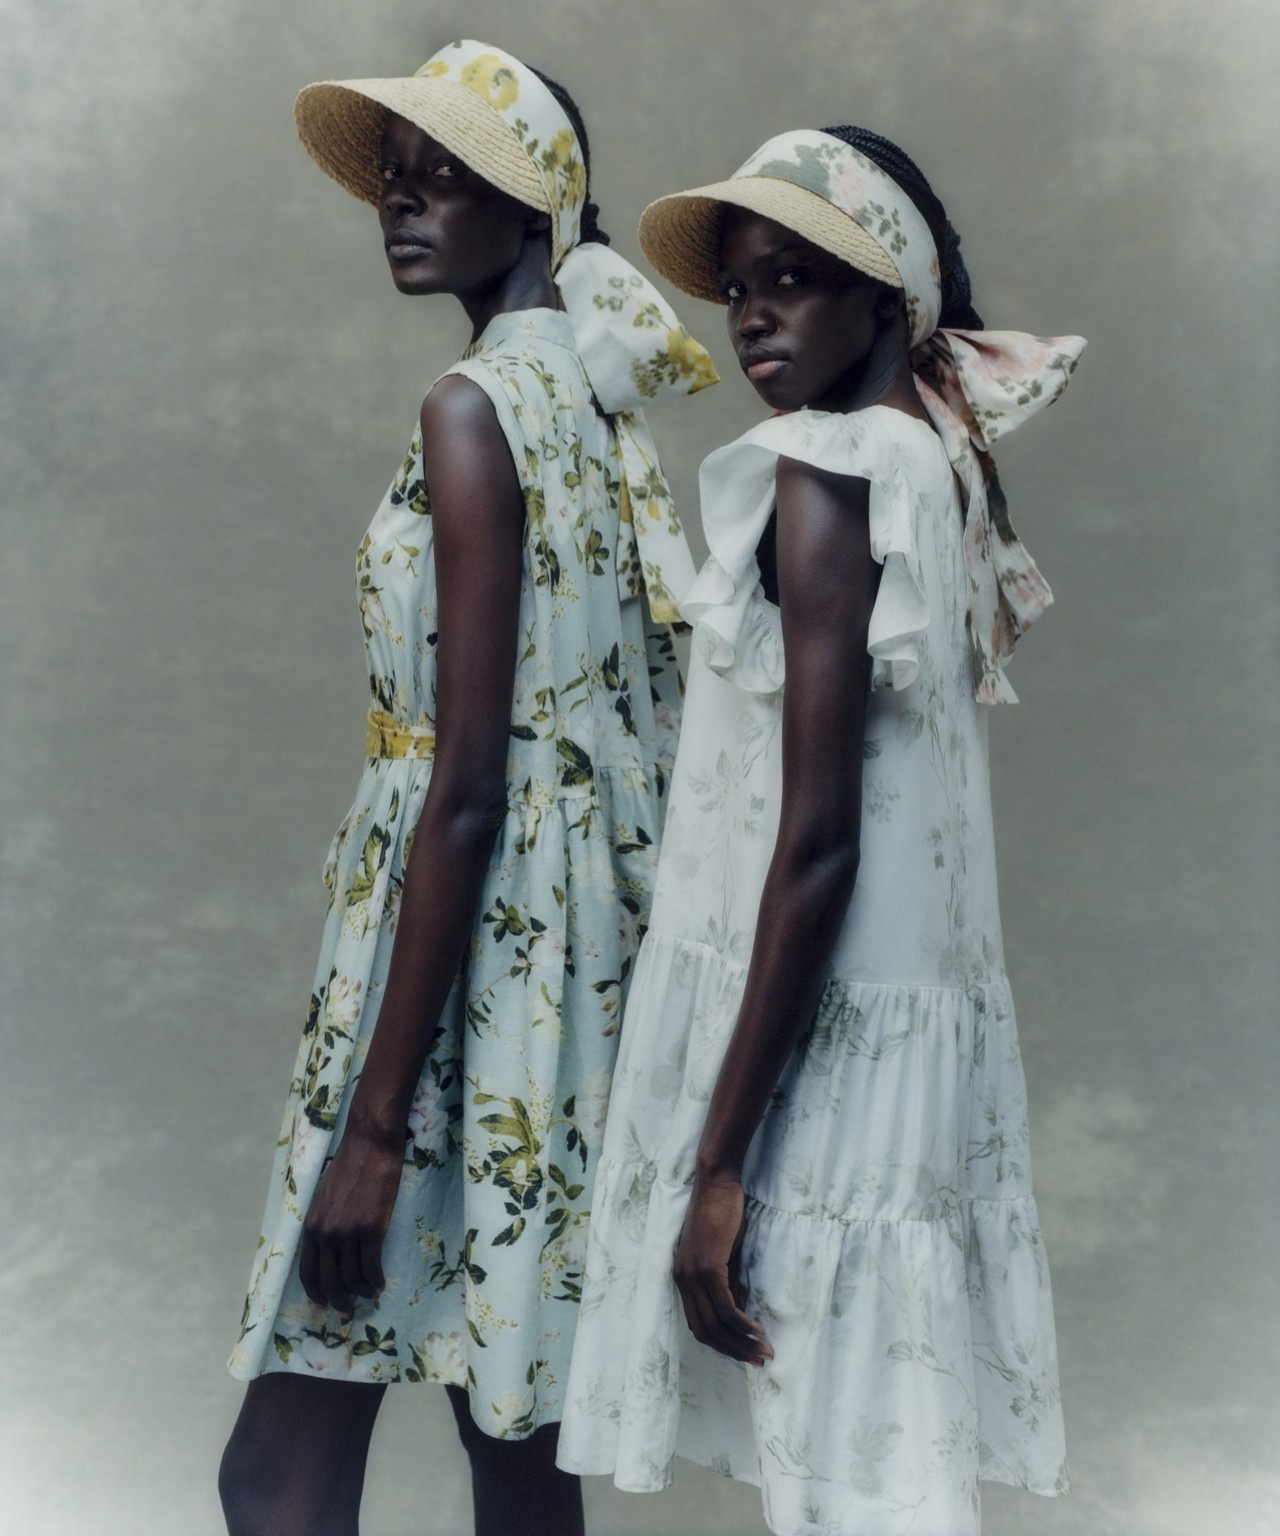 Erdem Vacation Collection lookbook 2023 featuring Models Anok Marial, Ayuol Manyok.